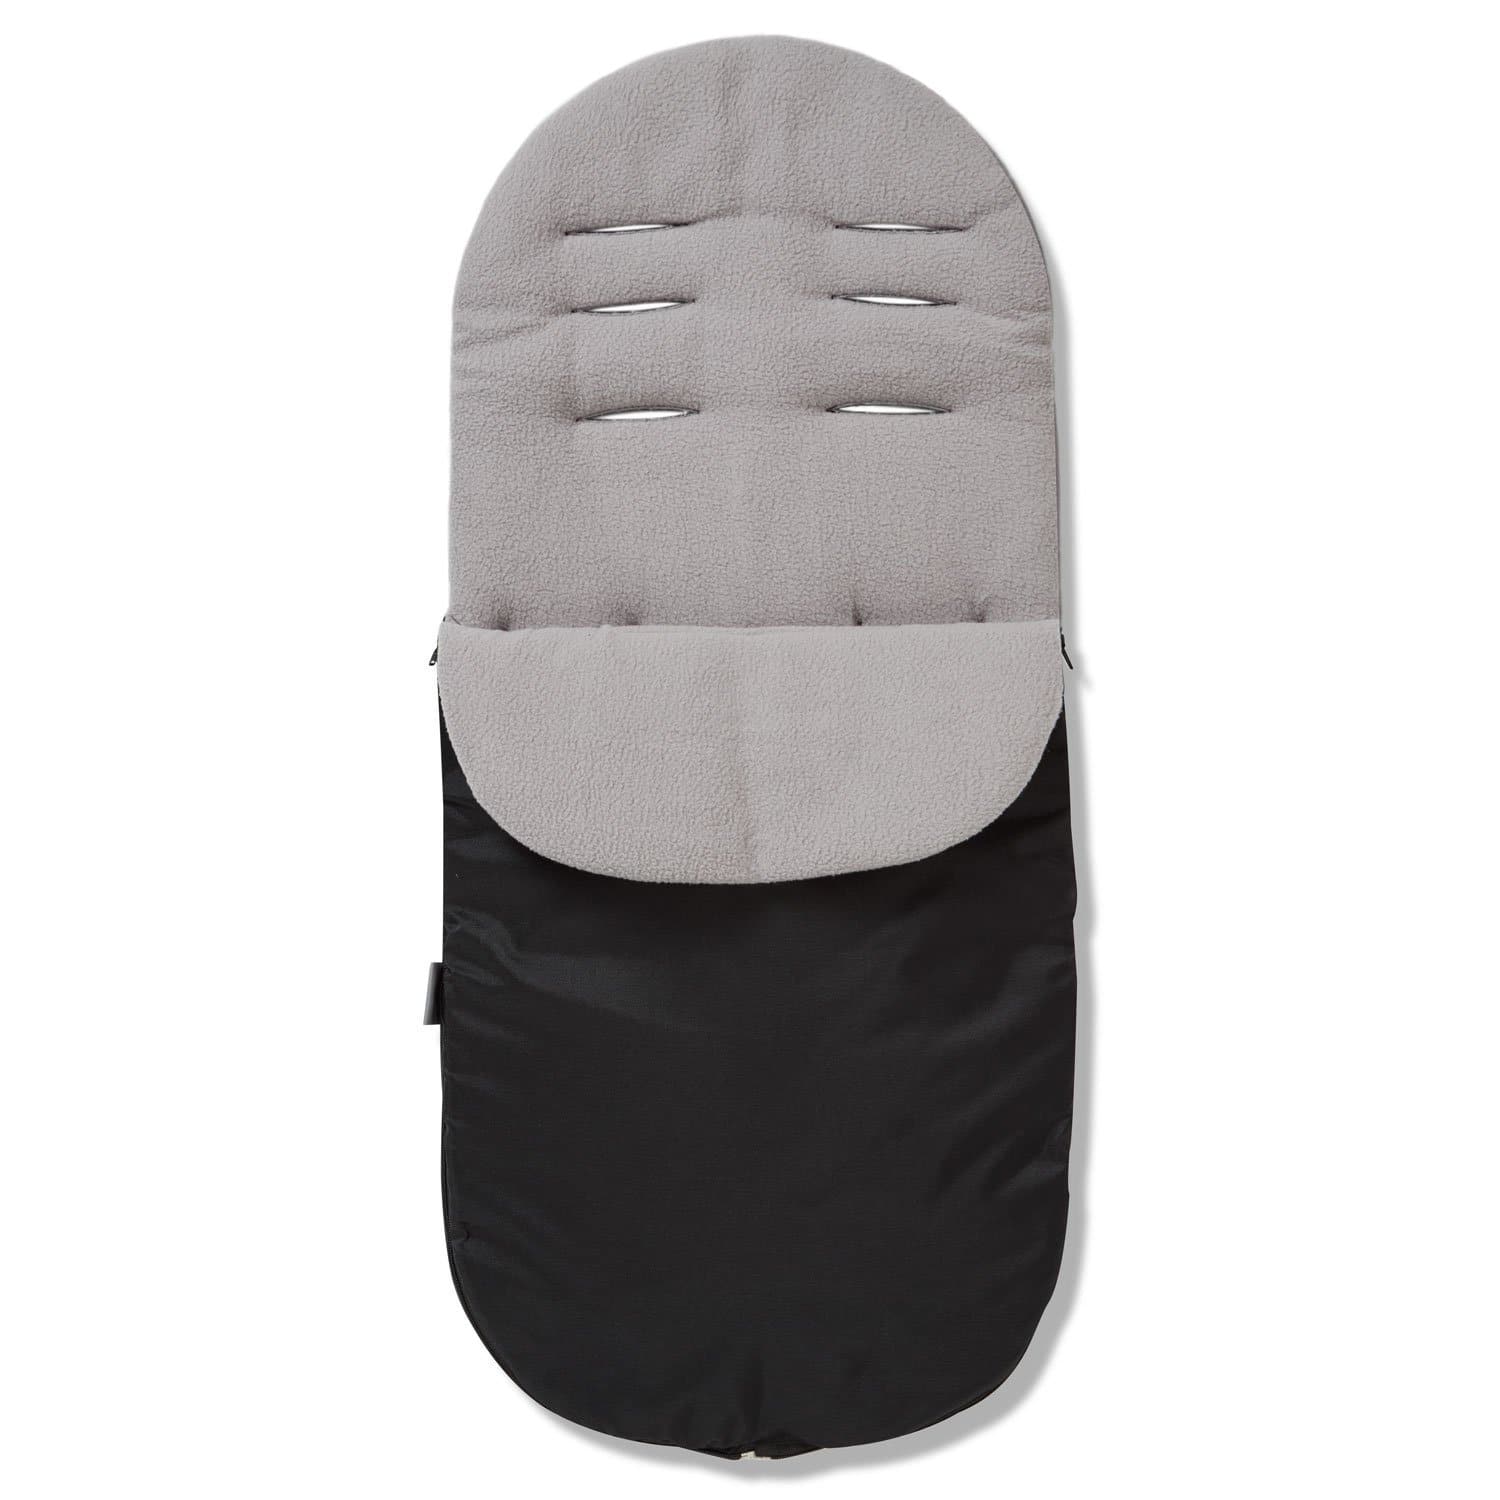 Footmuff / Cosy Toes Compatible with BabyCare - Grey / Fits All Models | For Your Little One